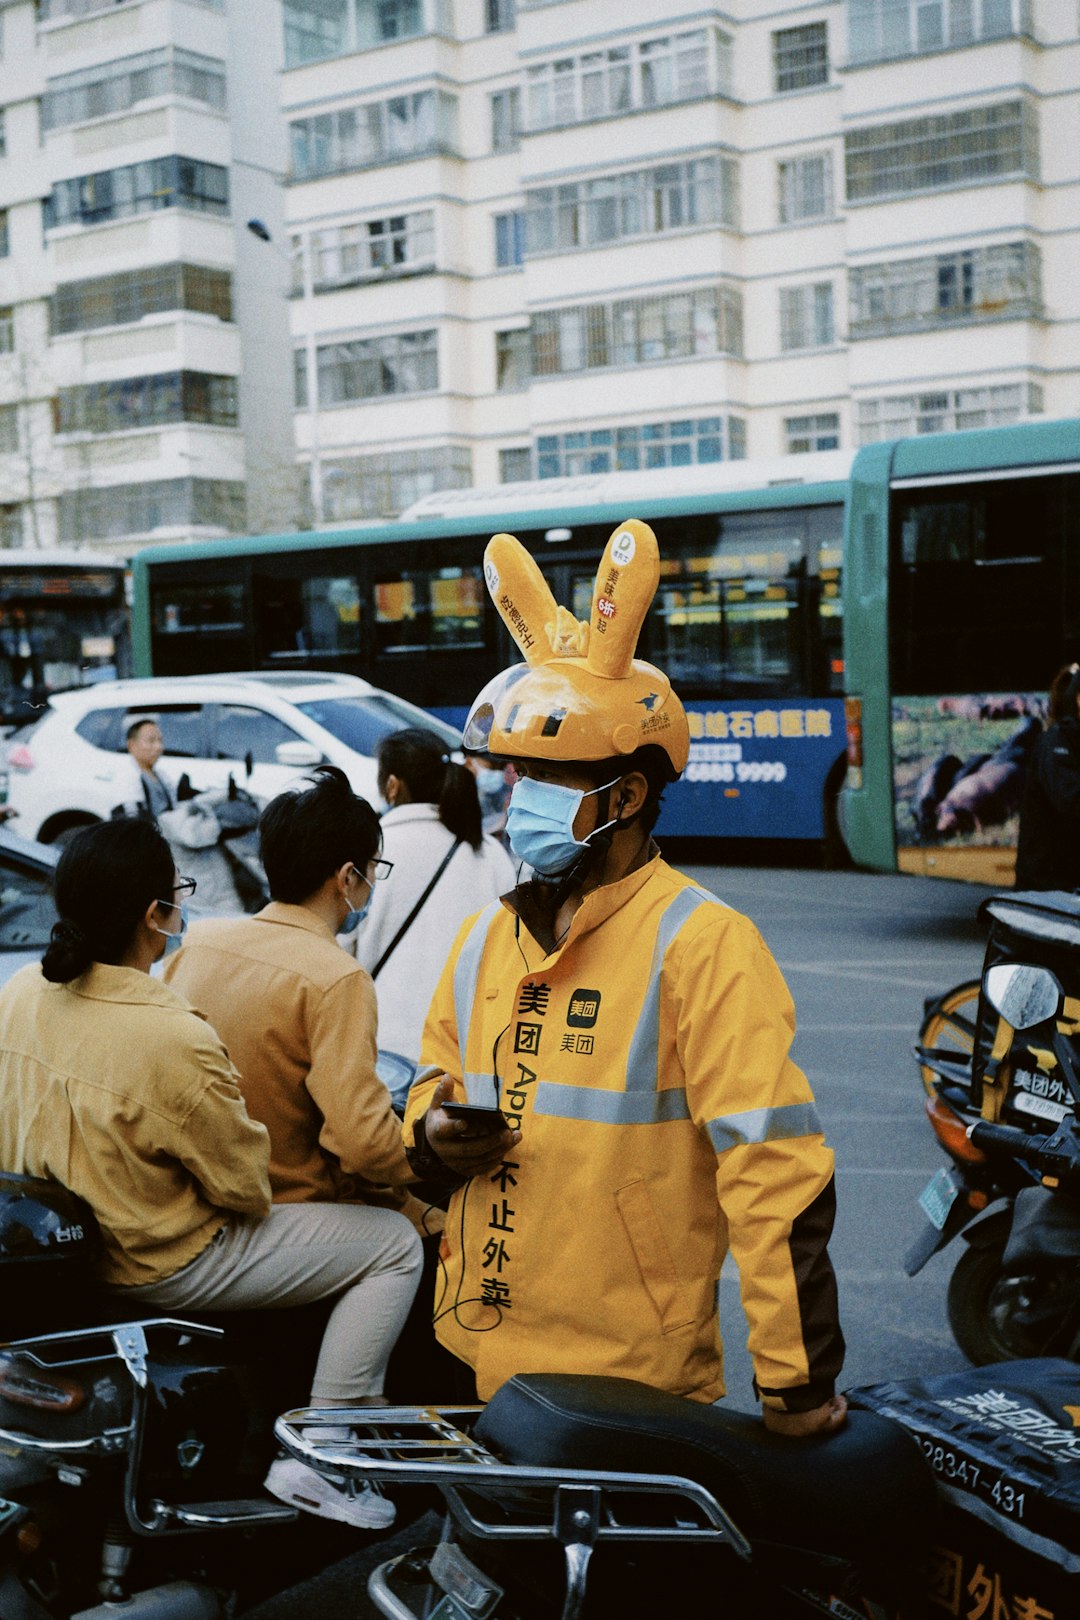 people in yellow and white uniform riding motorcycle during daytime